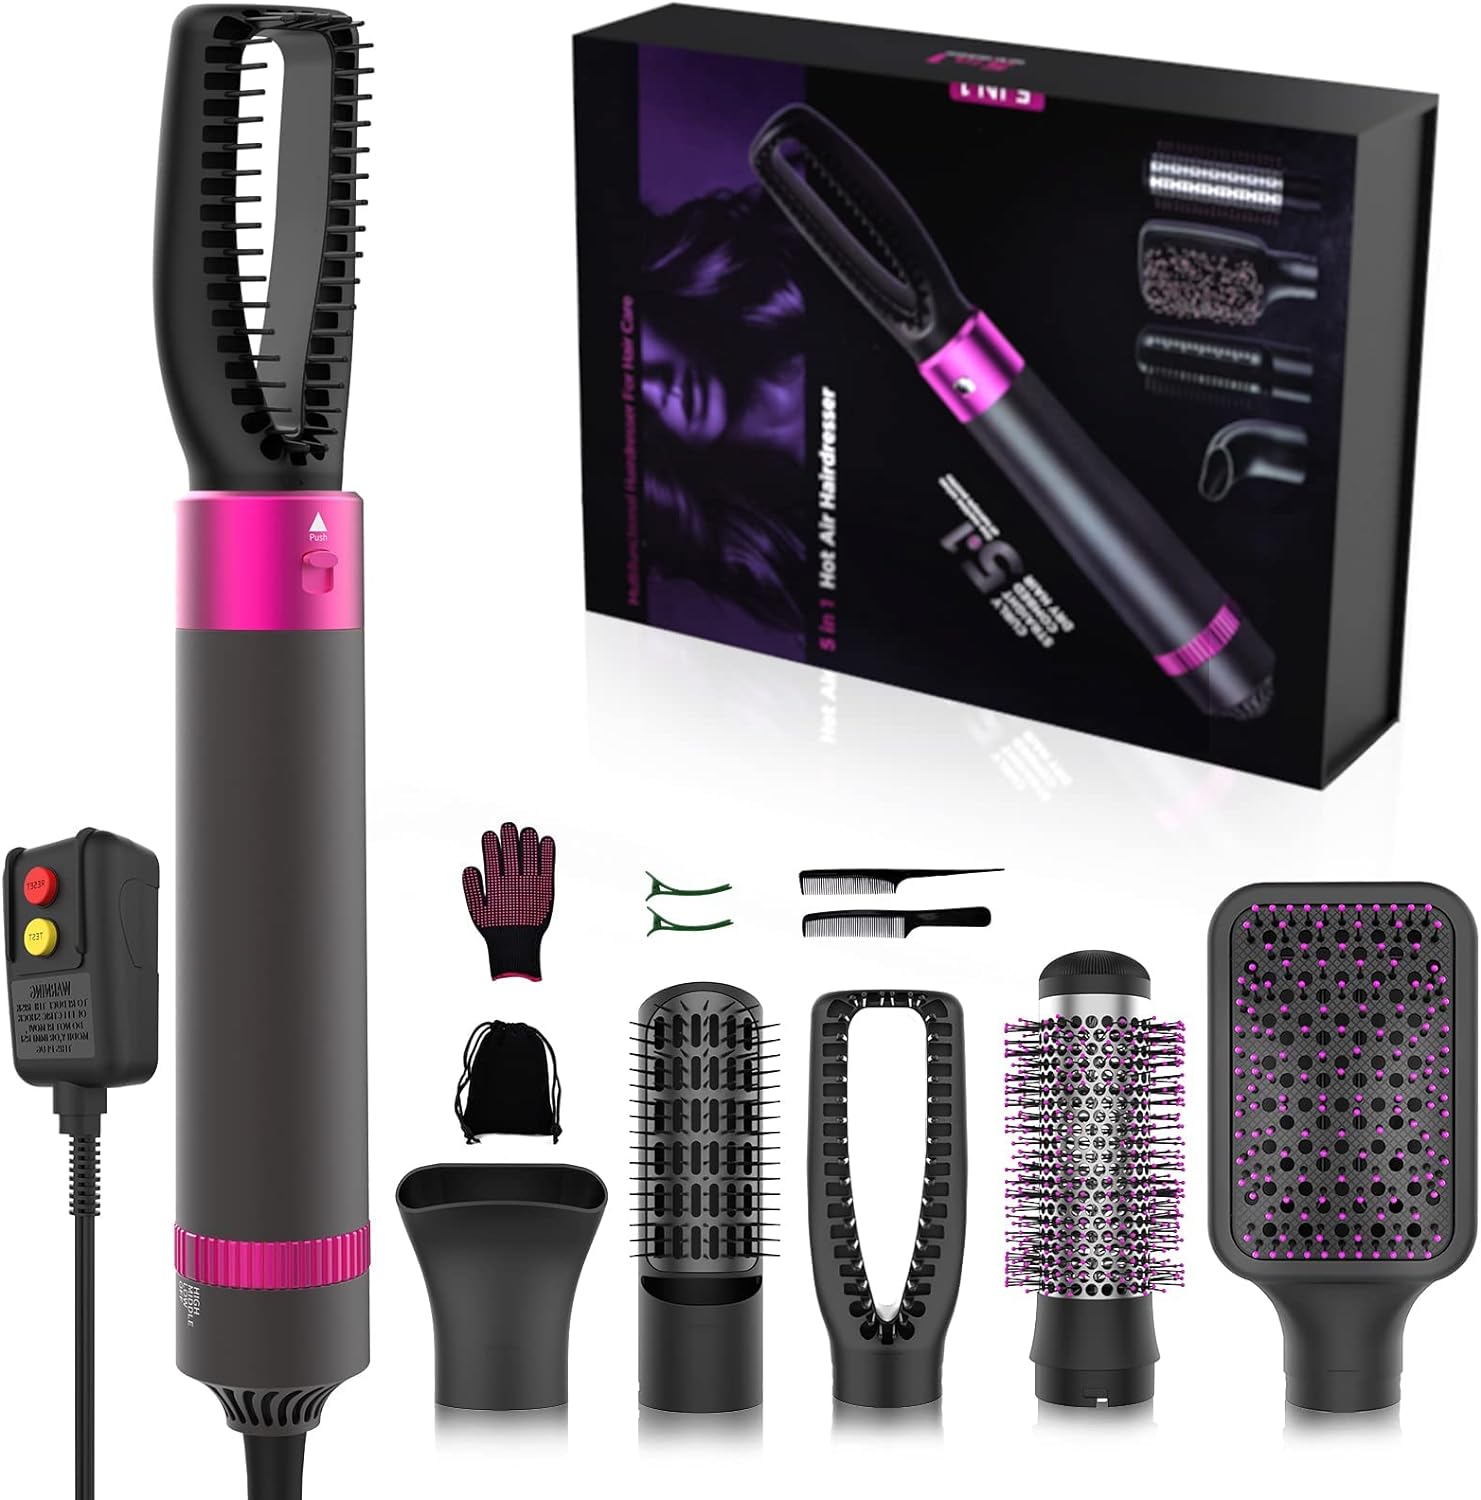 a picture showing a hair styler analog Dyson to sell online for profit